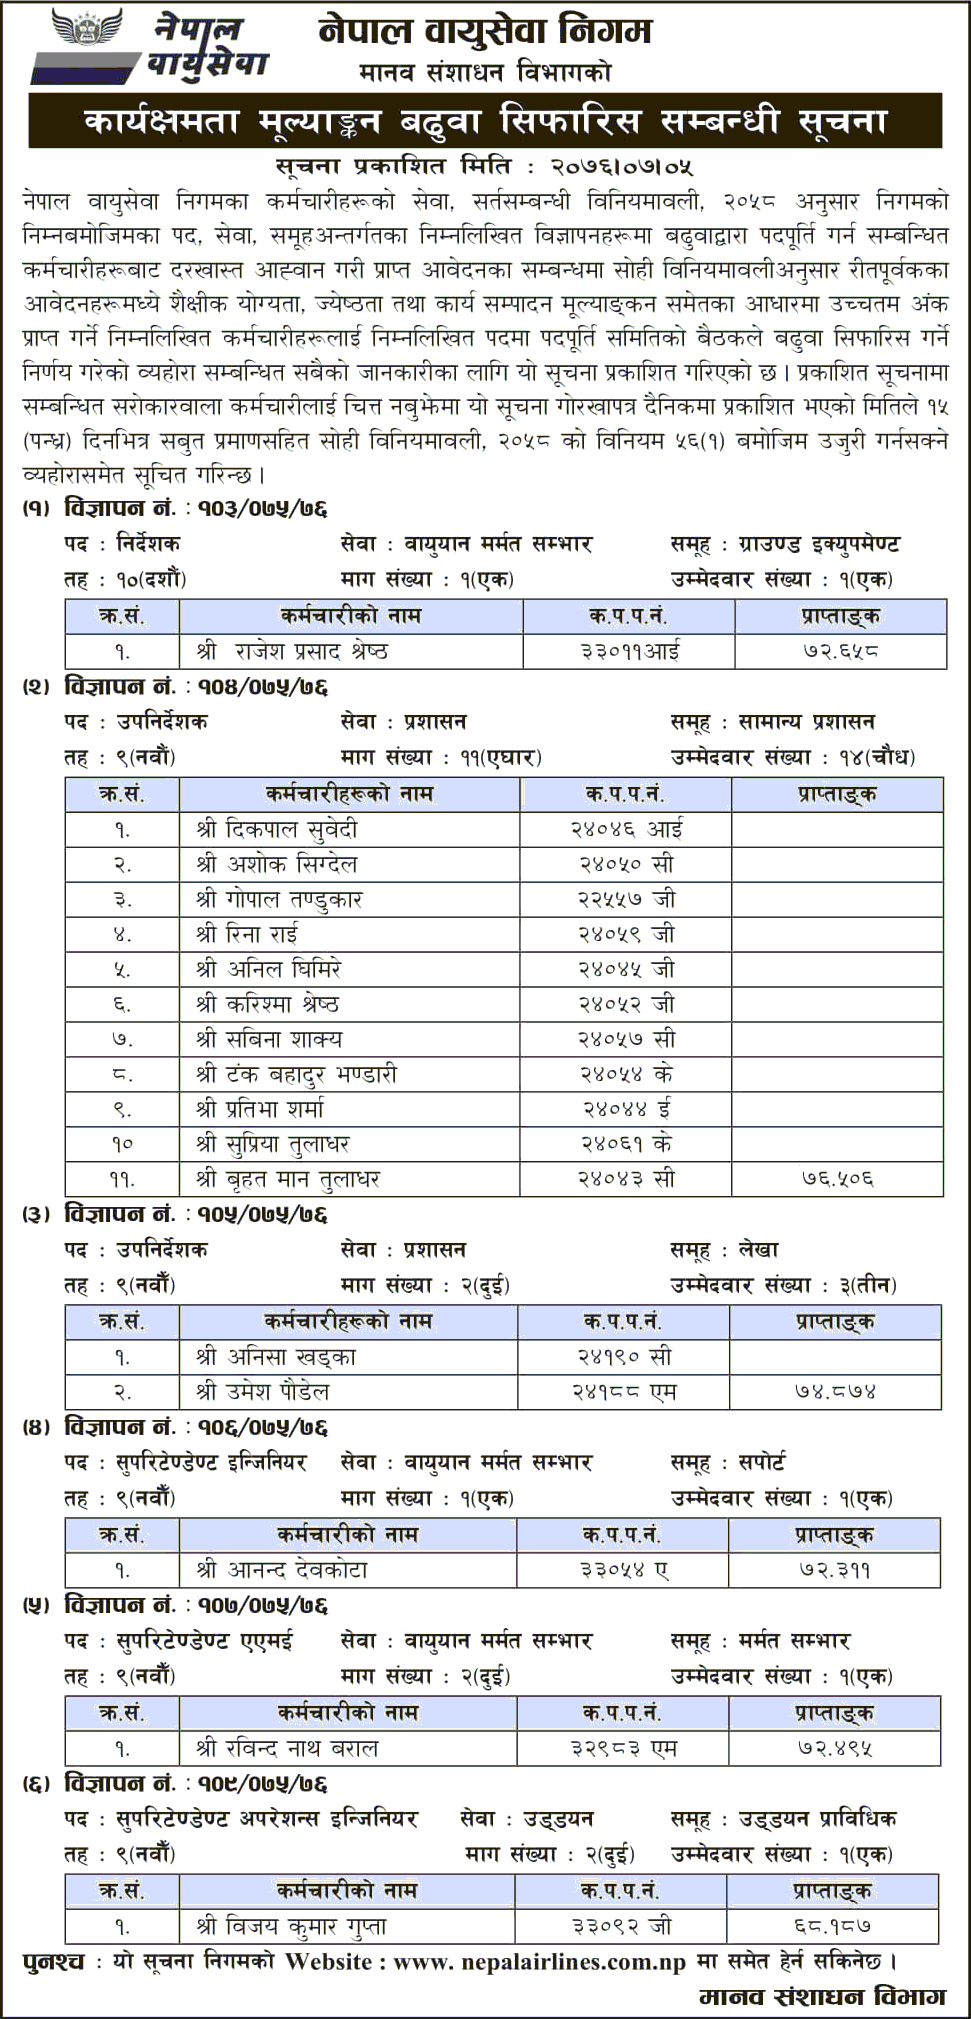 Nepal Airlines Corporation Employee Recommendation to Increment as per Performance Rating